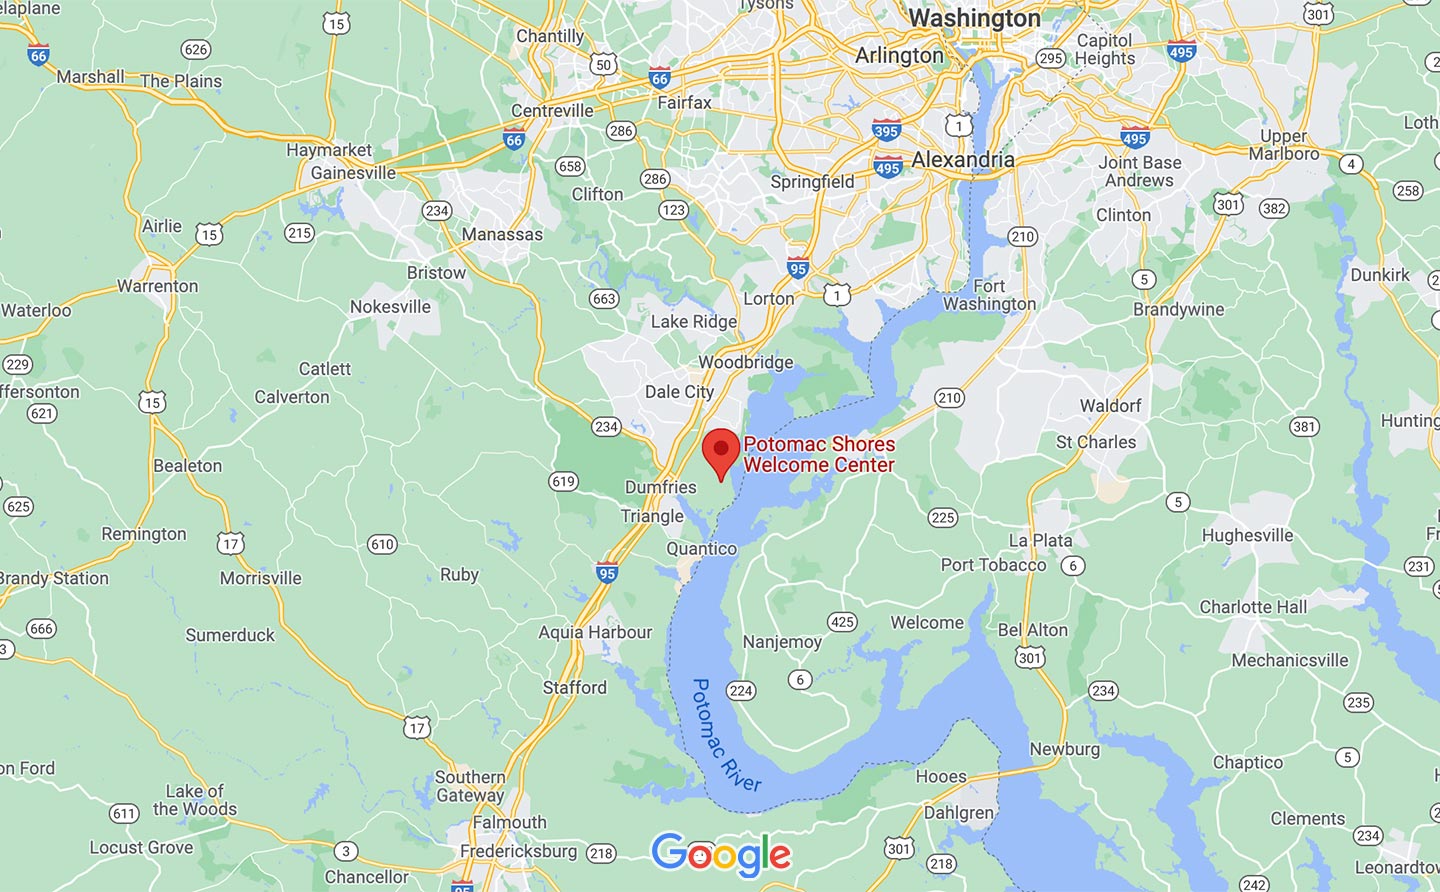 Map of Potomac Shores and the surrounding area, from Google Maps